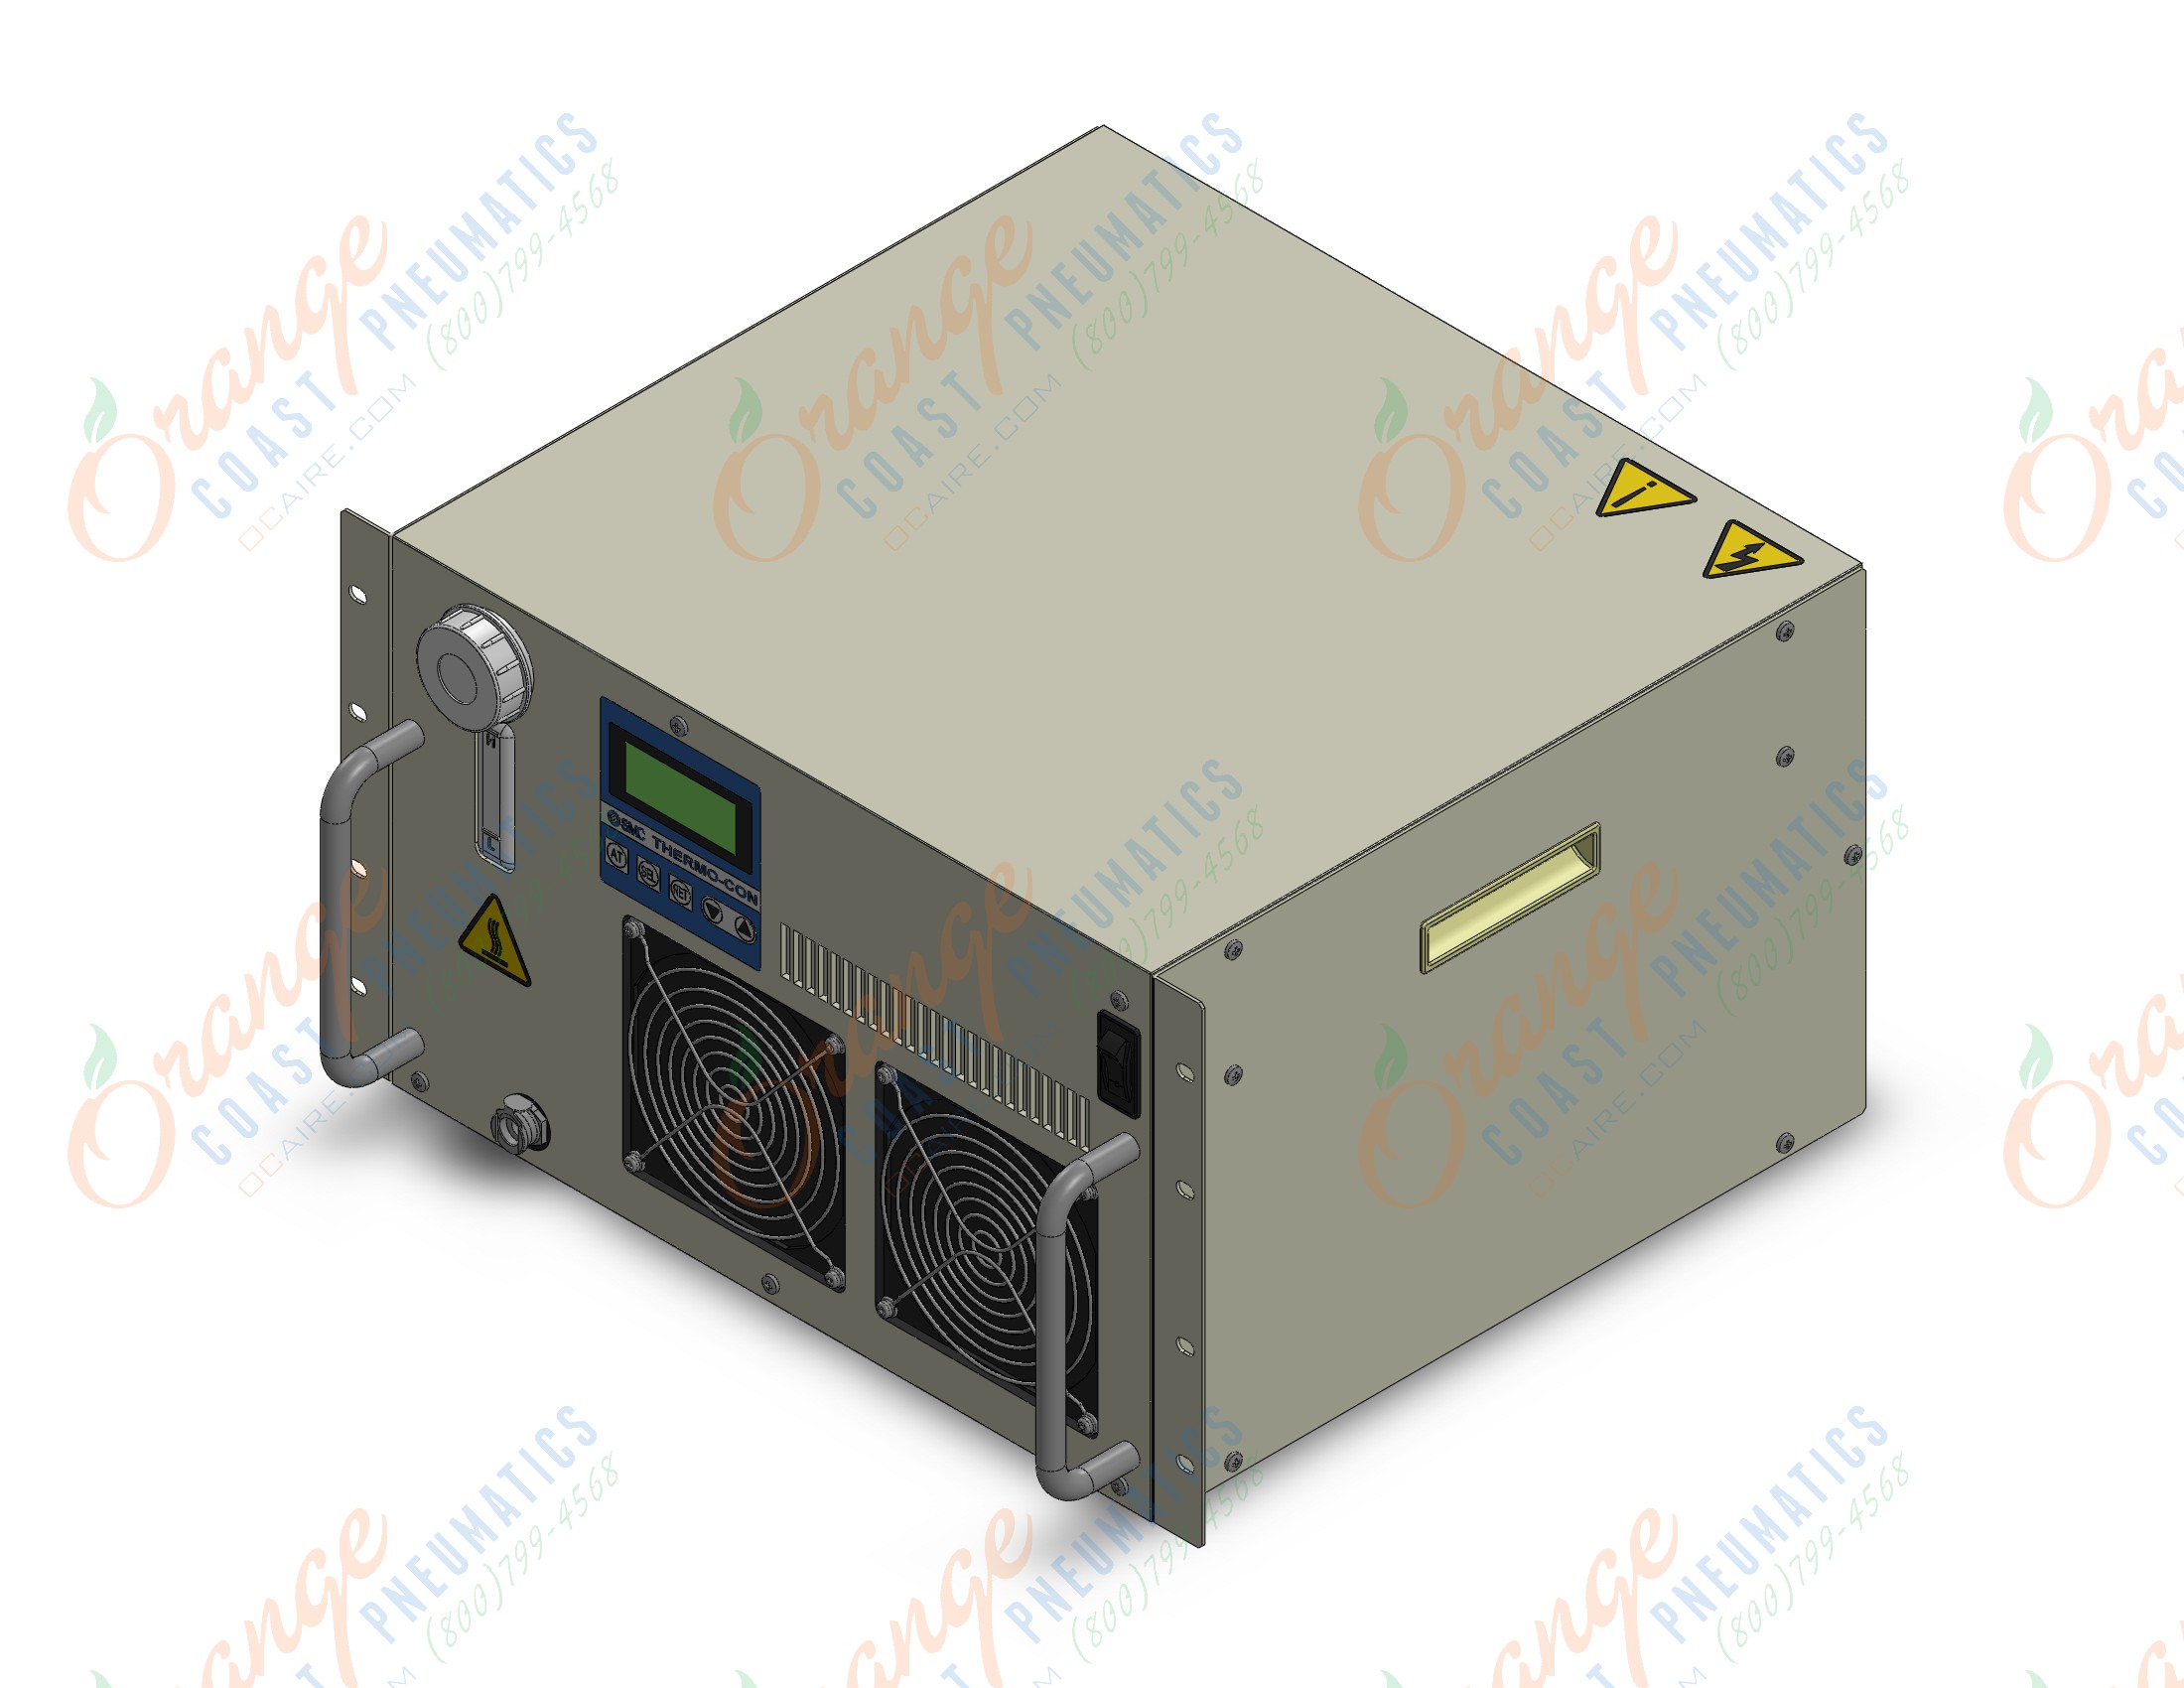 SMC HECR010-A2N-F thermo con, rack mount, HRG - INDUSTRIAL CHILLER